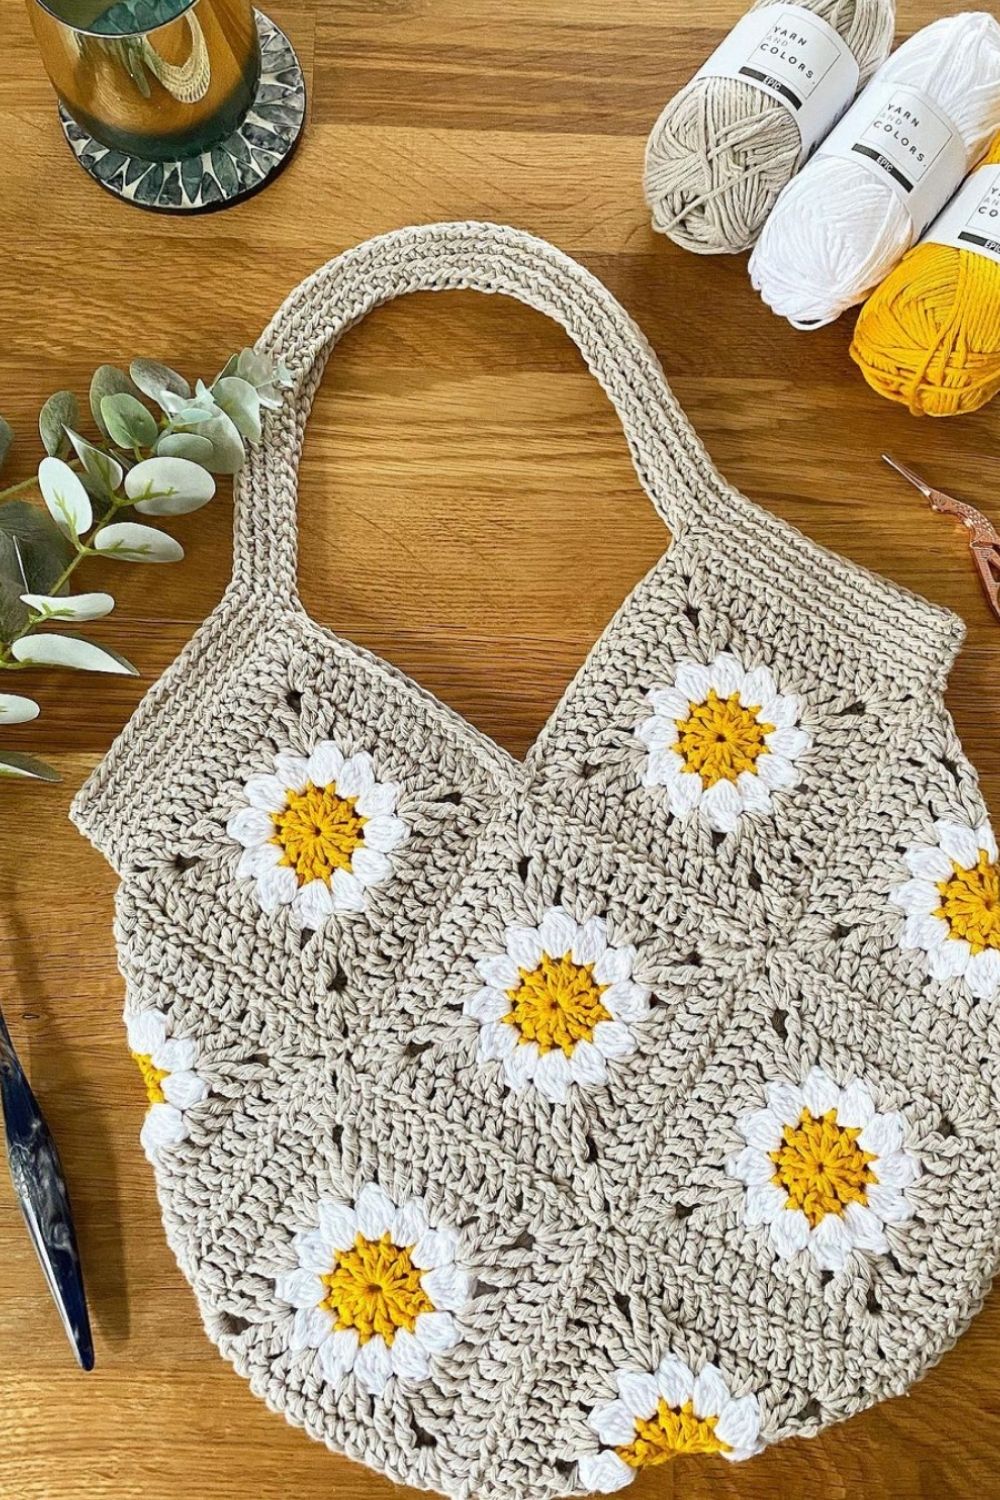 Handmade Crochet Bags Prices 2022 | See Right Now